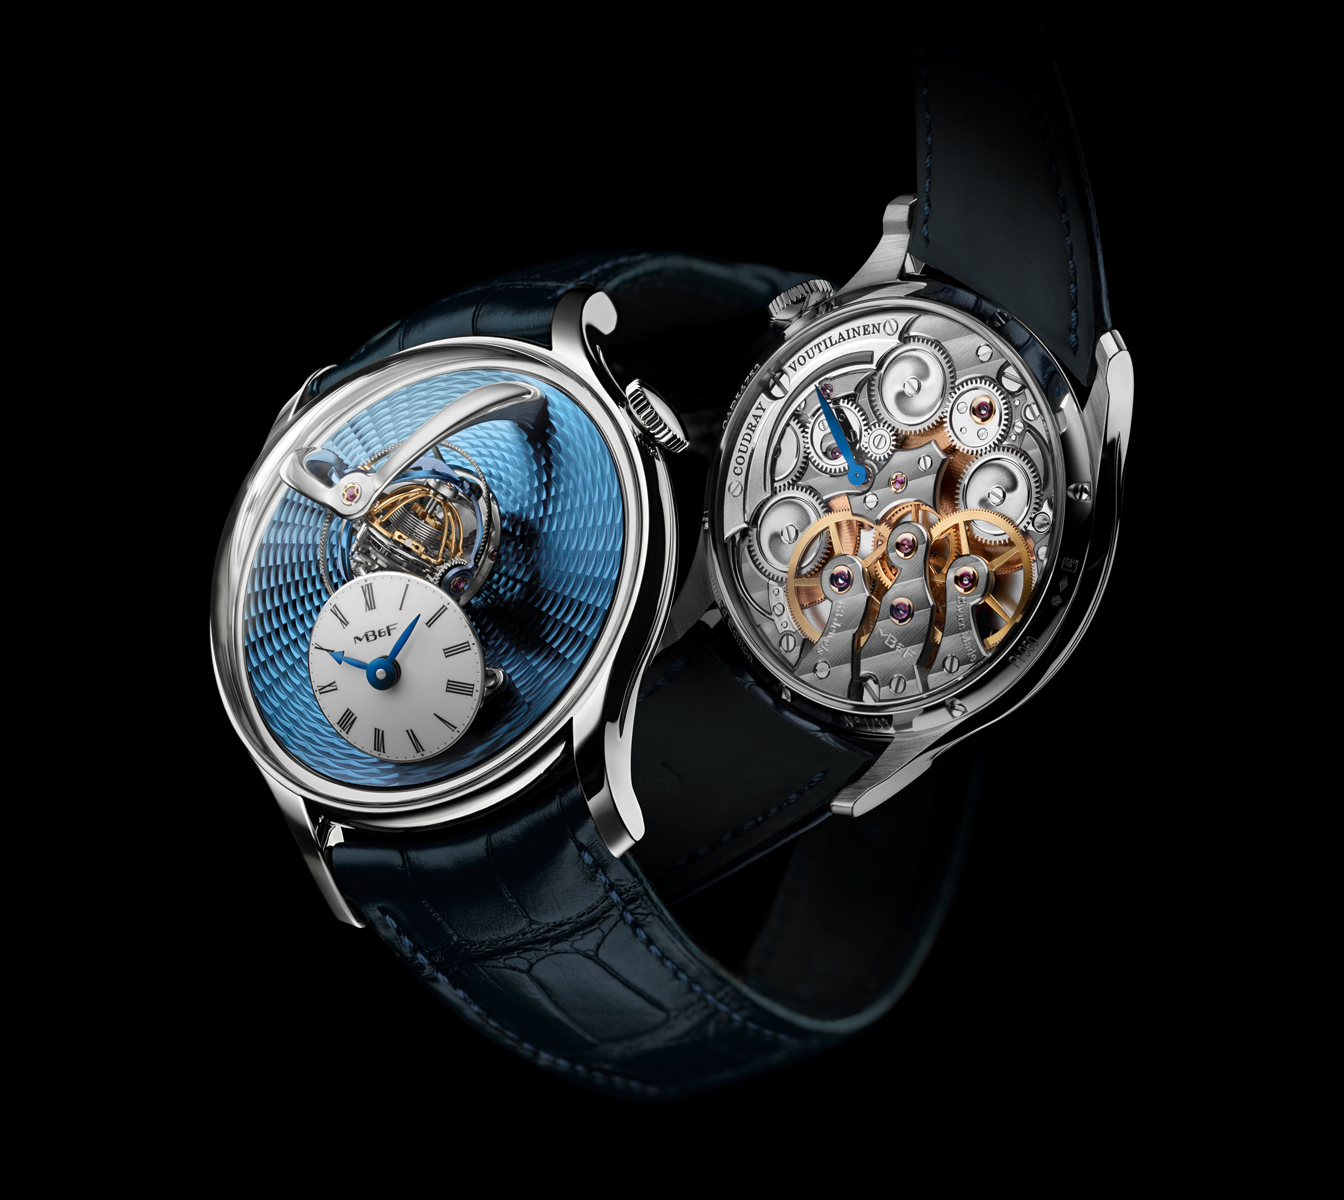 Thundercomm powers Louis Vuitton's new connected watch - Thundercomm